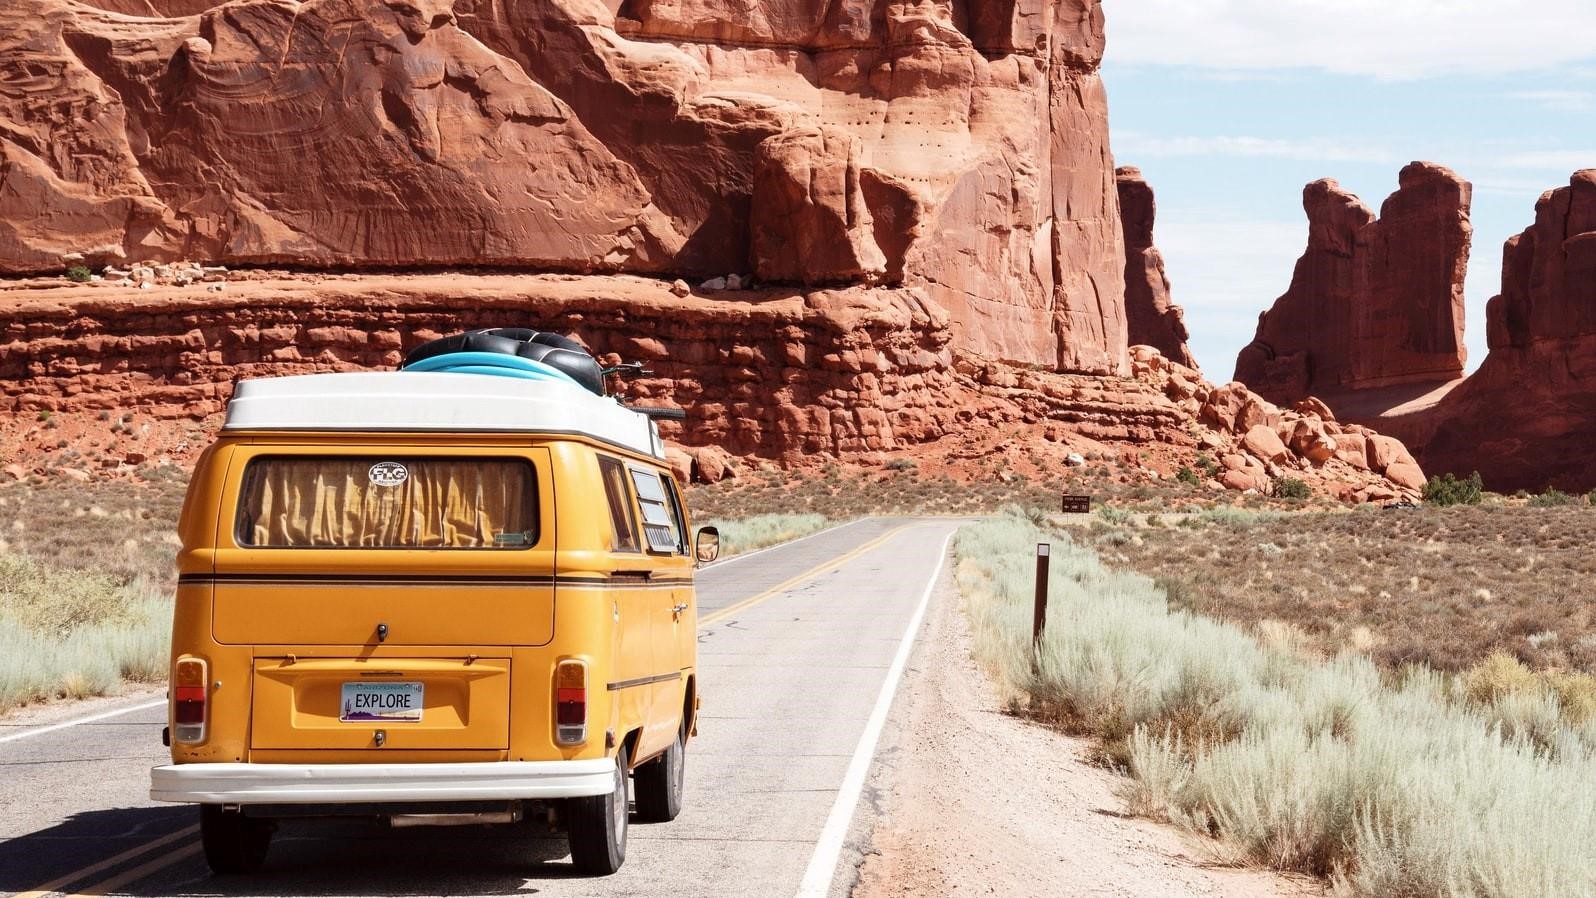 A VW van driving a highway though a steep cliffed desert setting.